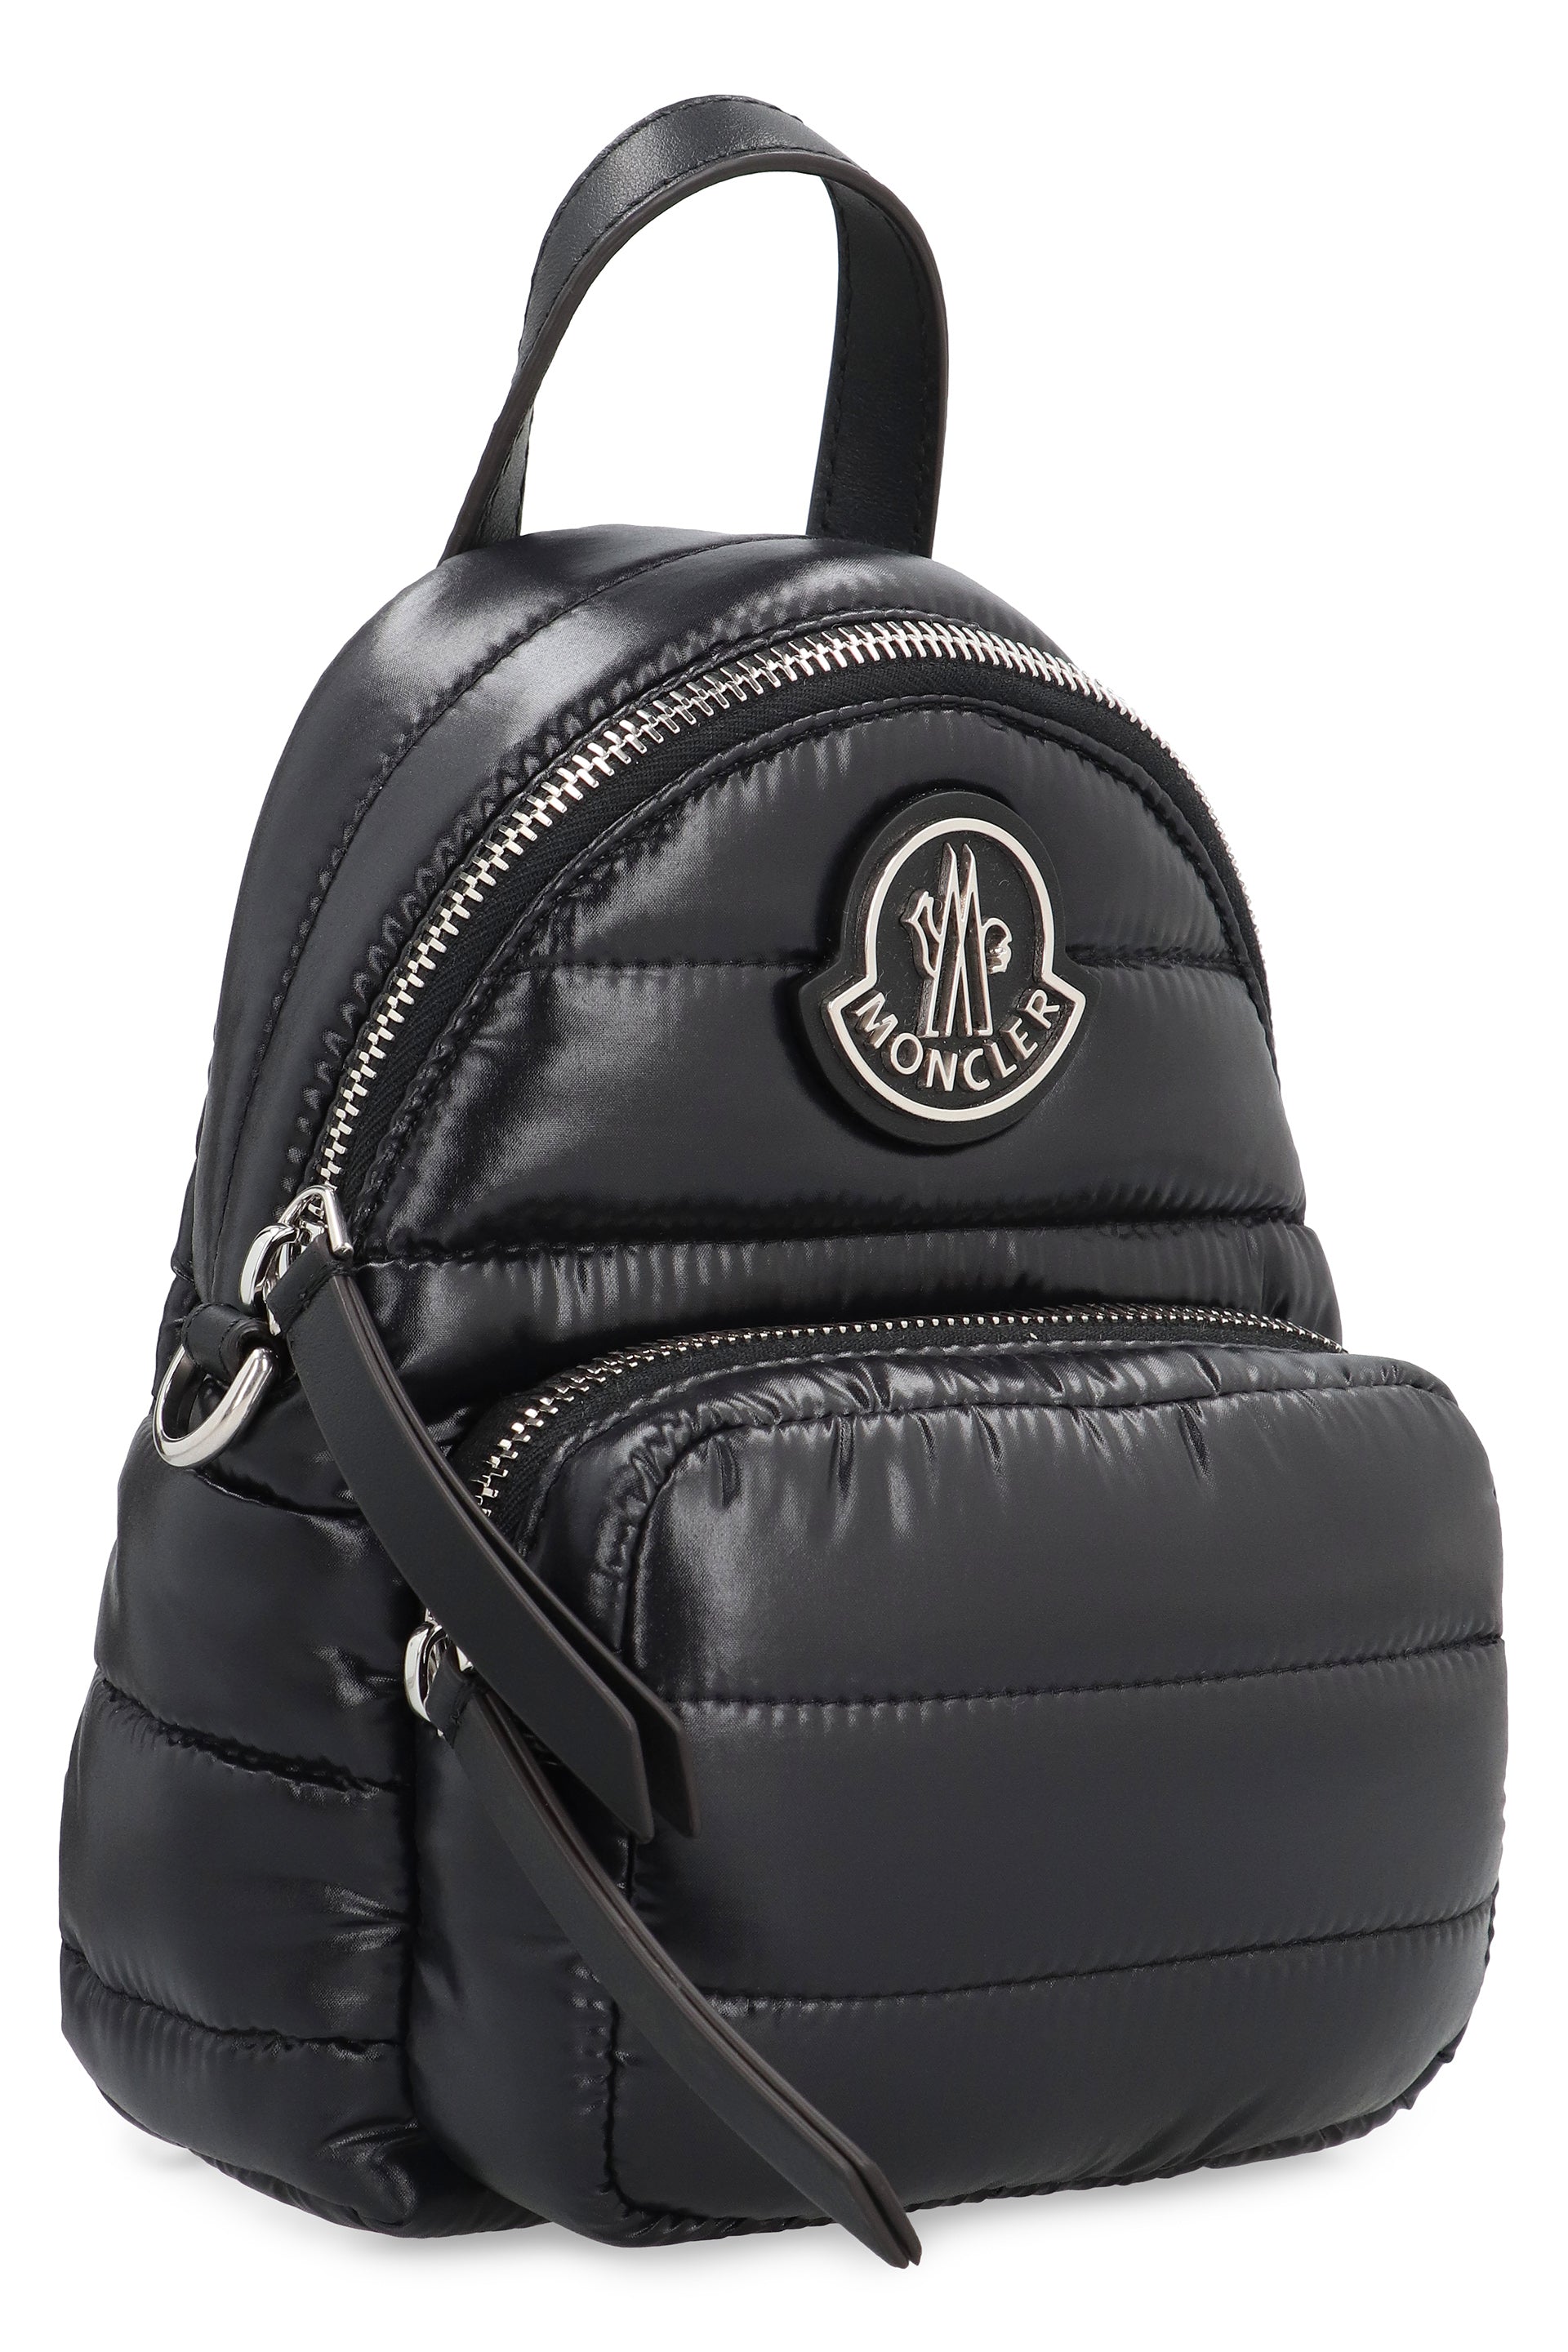 Shop Moncler Padded Nylon Crossbody Handbag With Leather Details And Removable Strap In Black